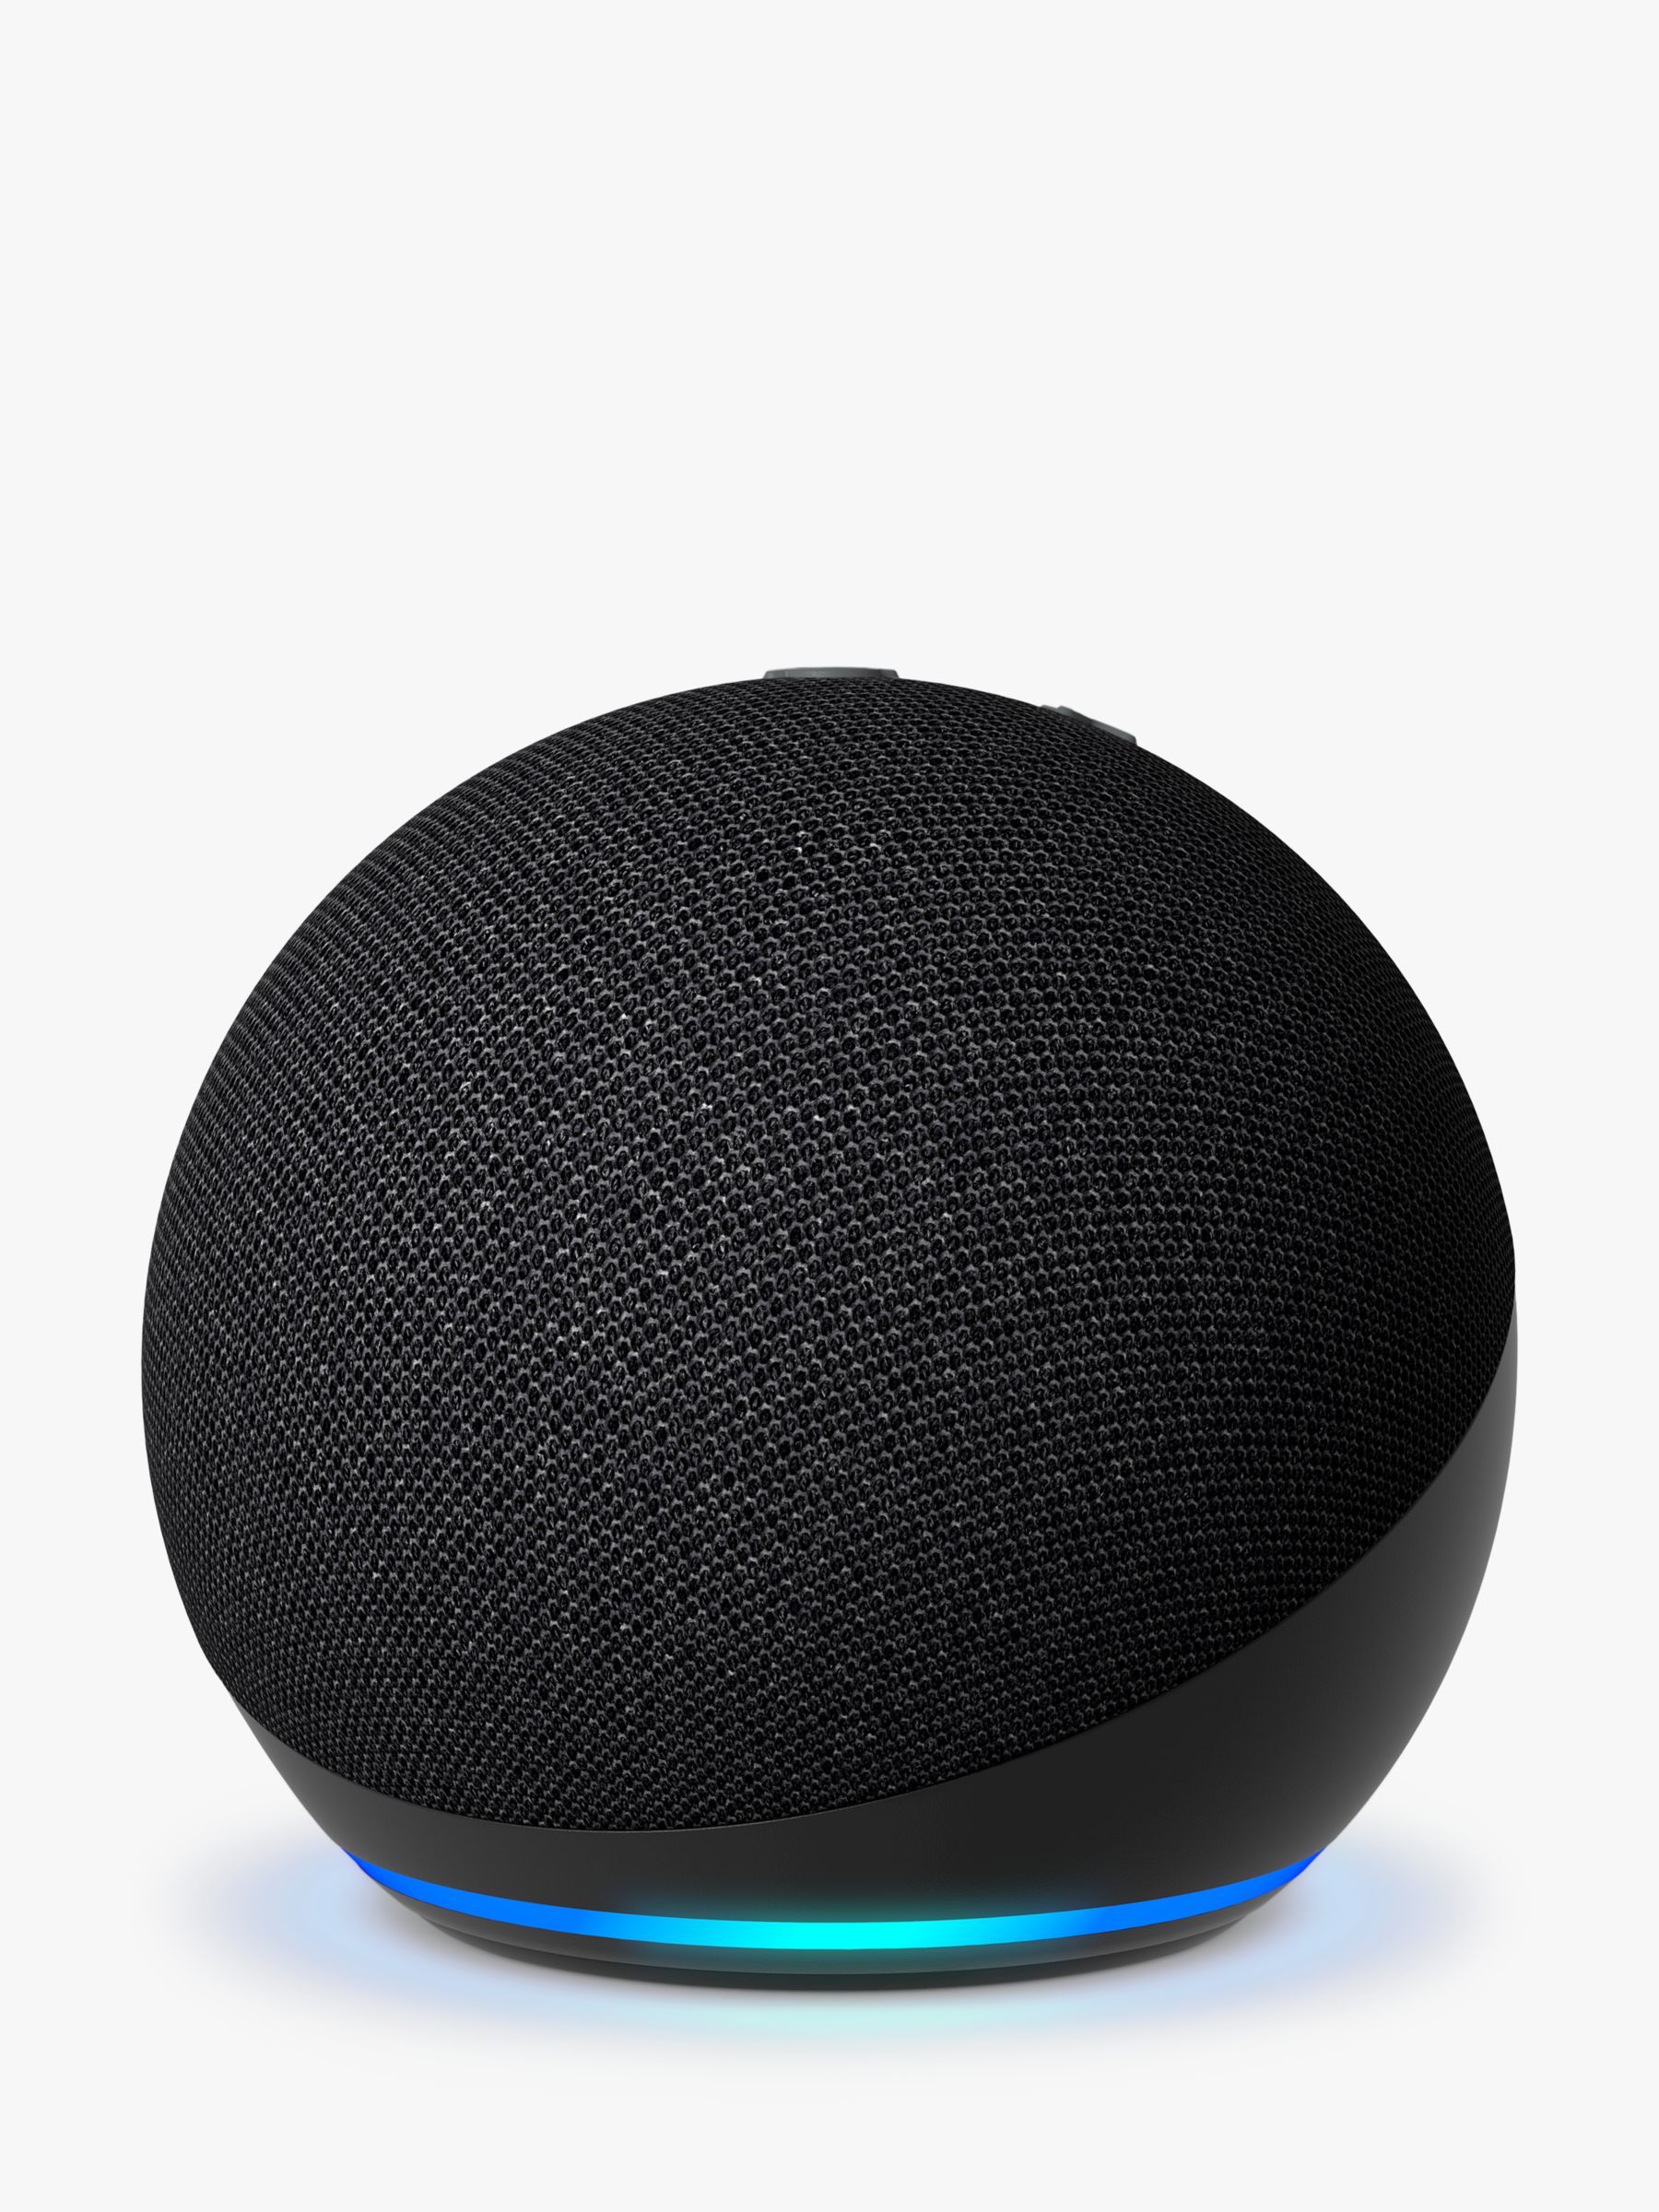 Echo Dot Smart Speaker with Alexa Voice Recognition